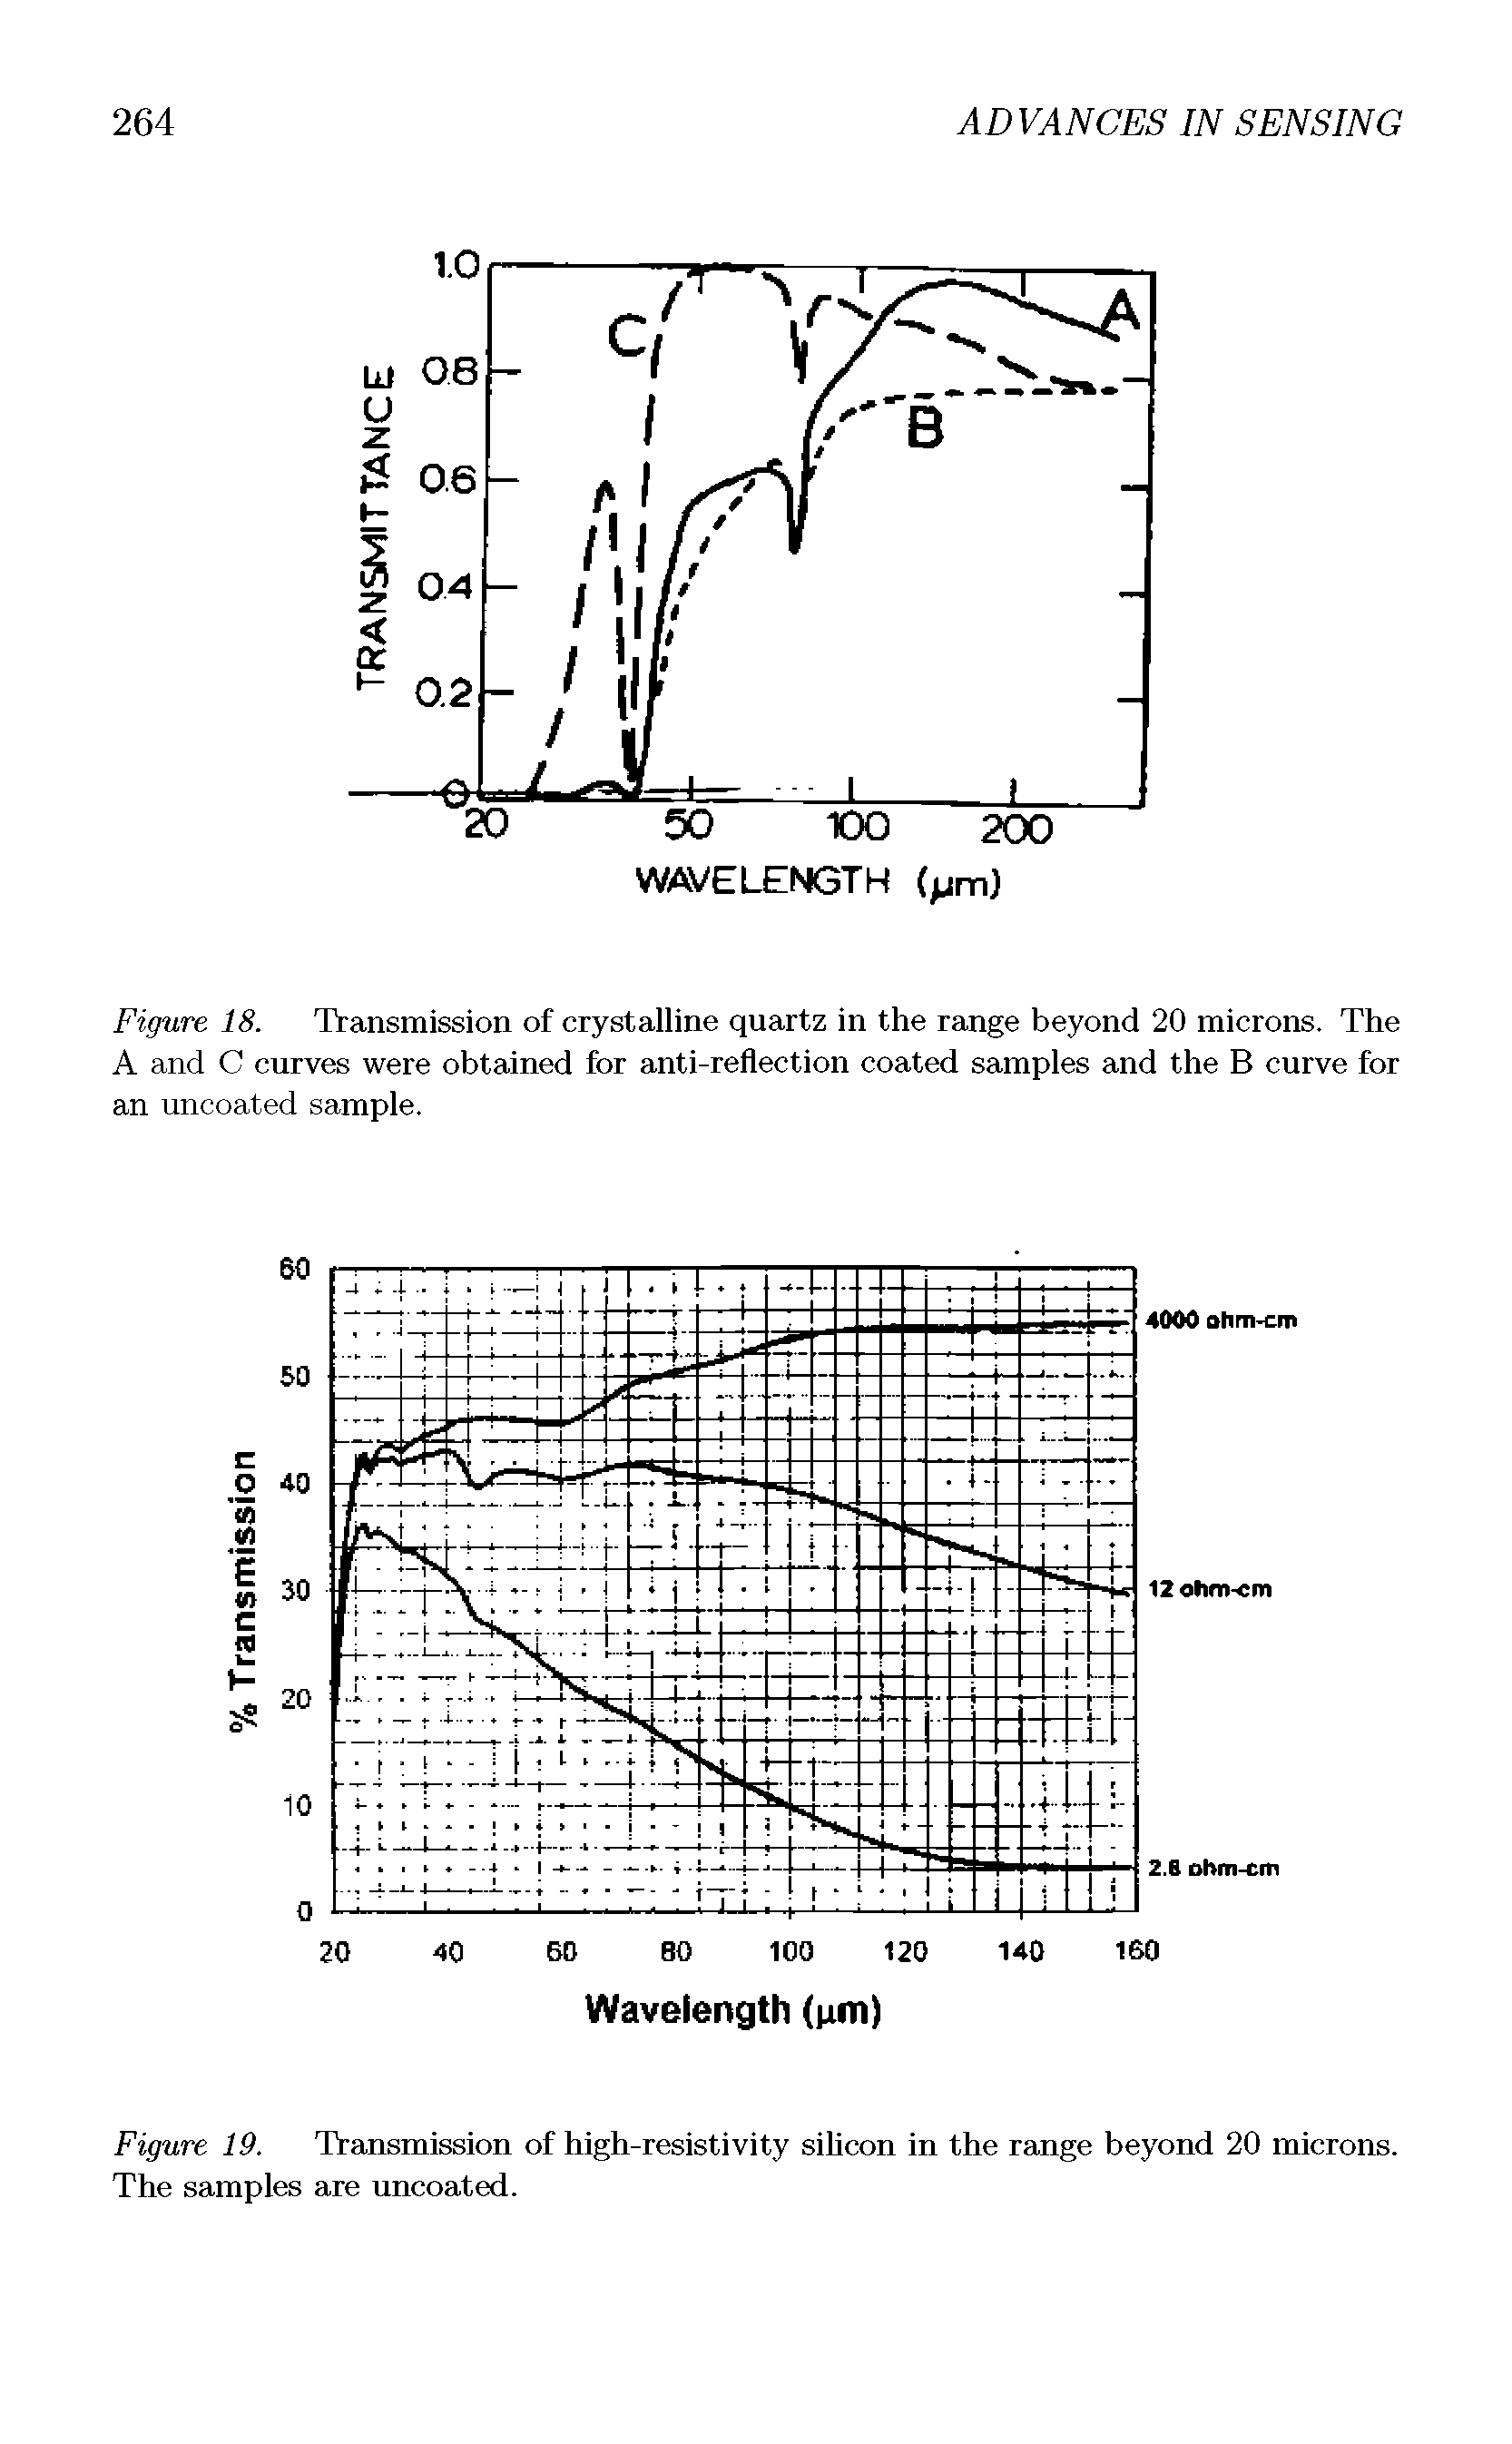 Figure 18. Transmission of crystalline quartz in the range beyond 20 microns. The A and C curves were obtained for anti-reflection coated samples and the B curve for...